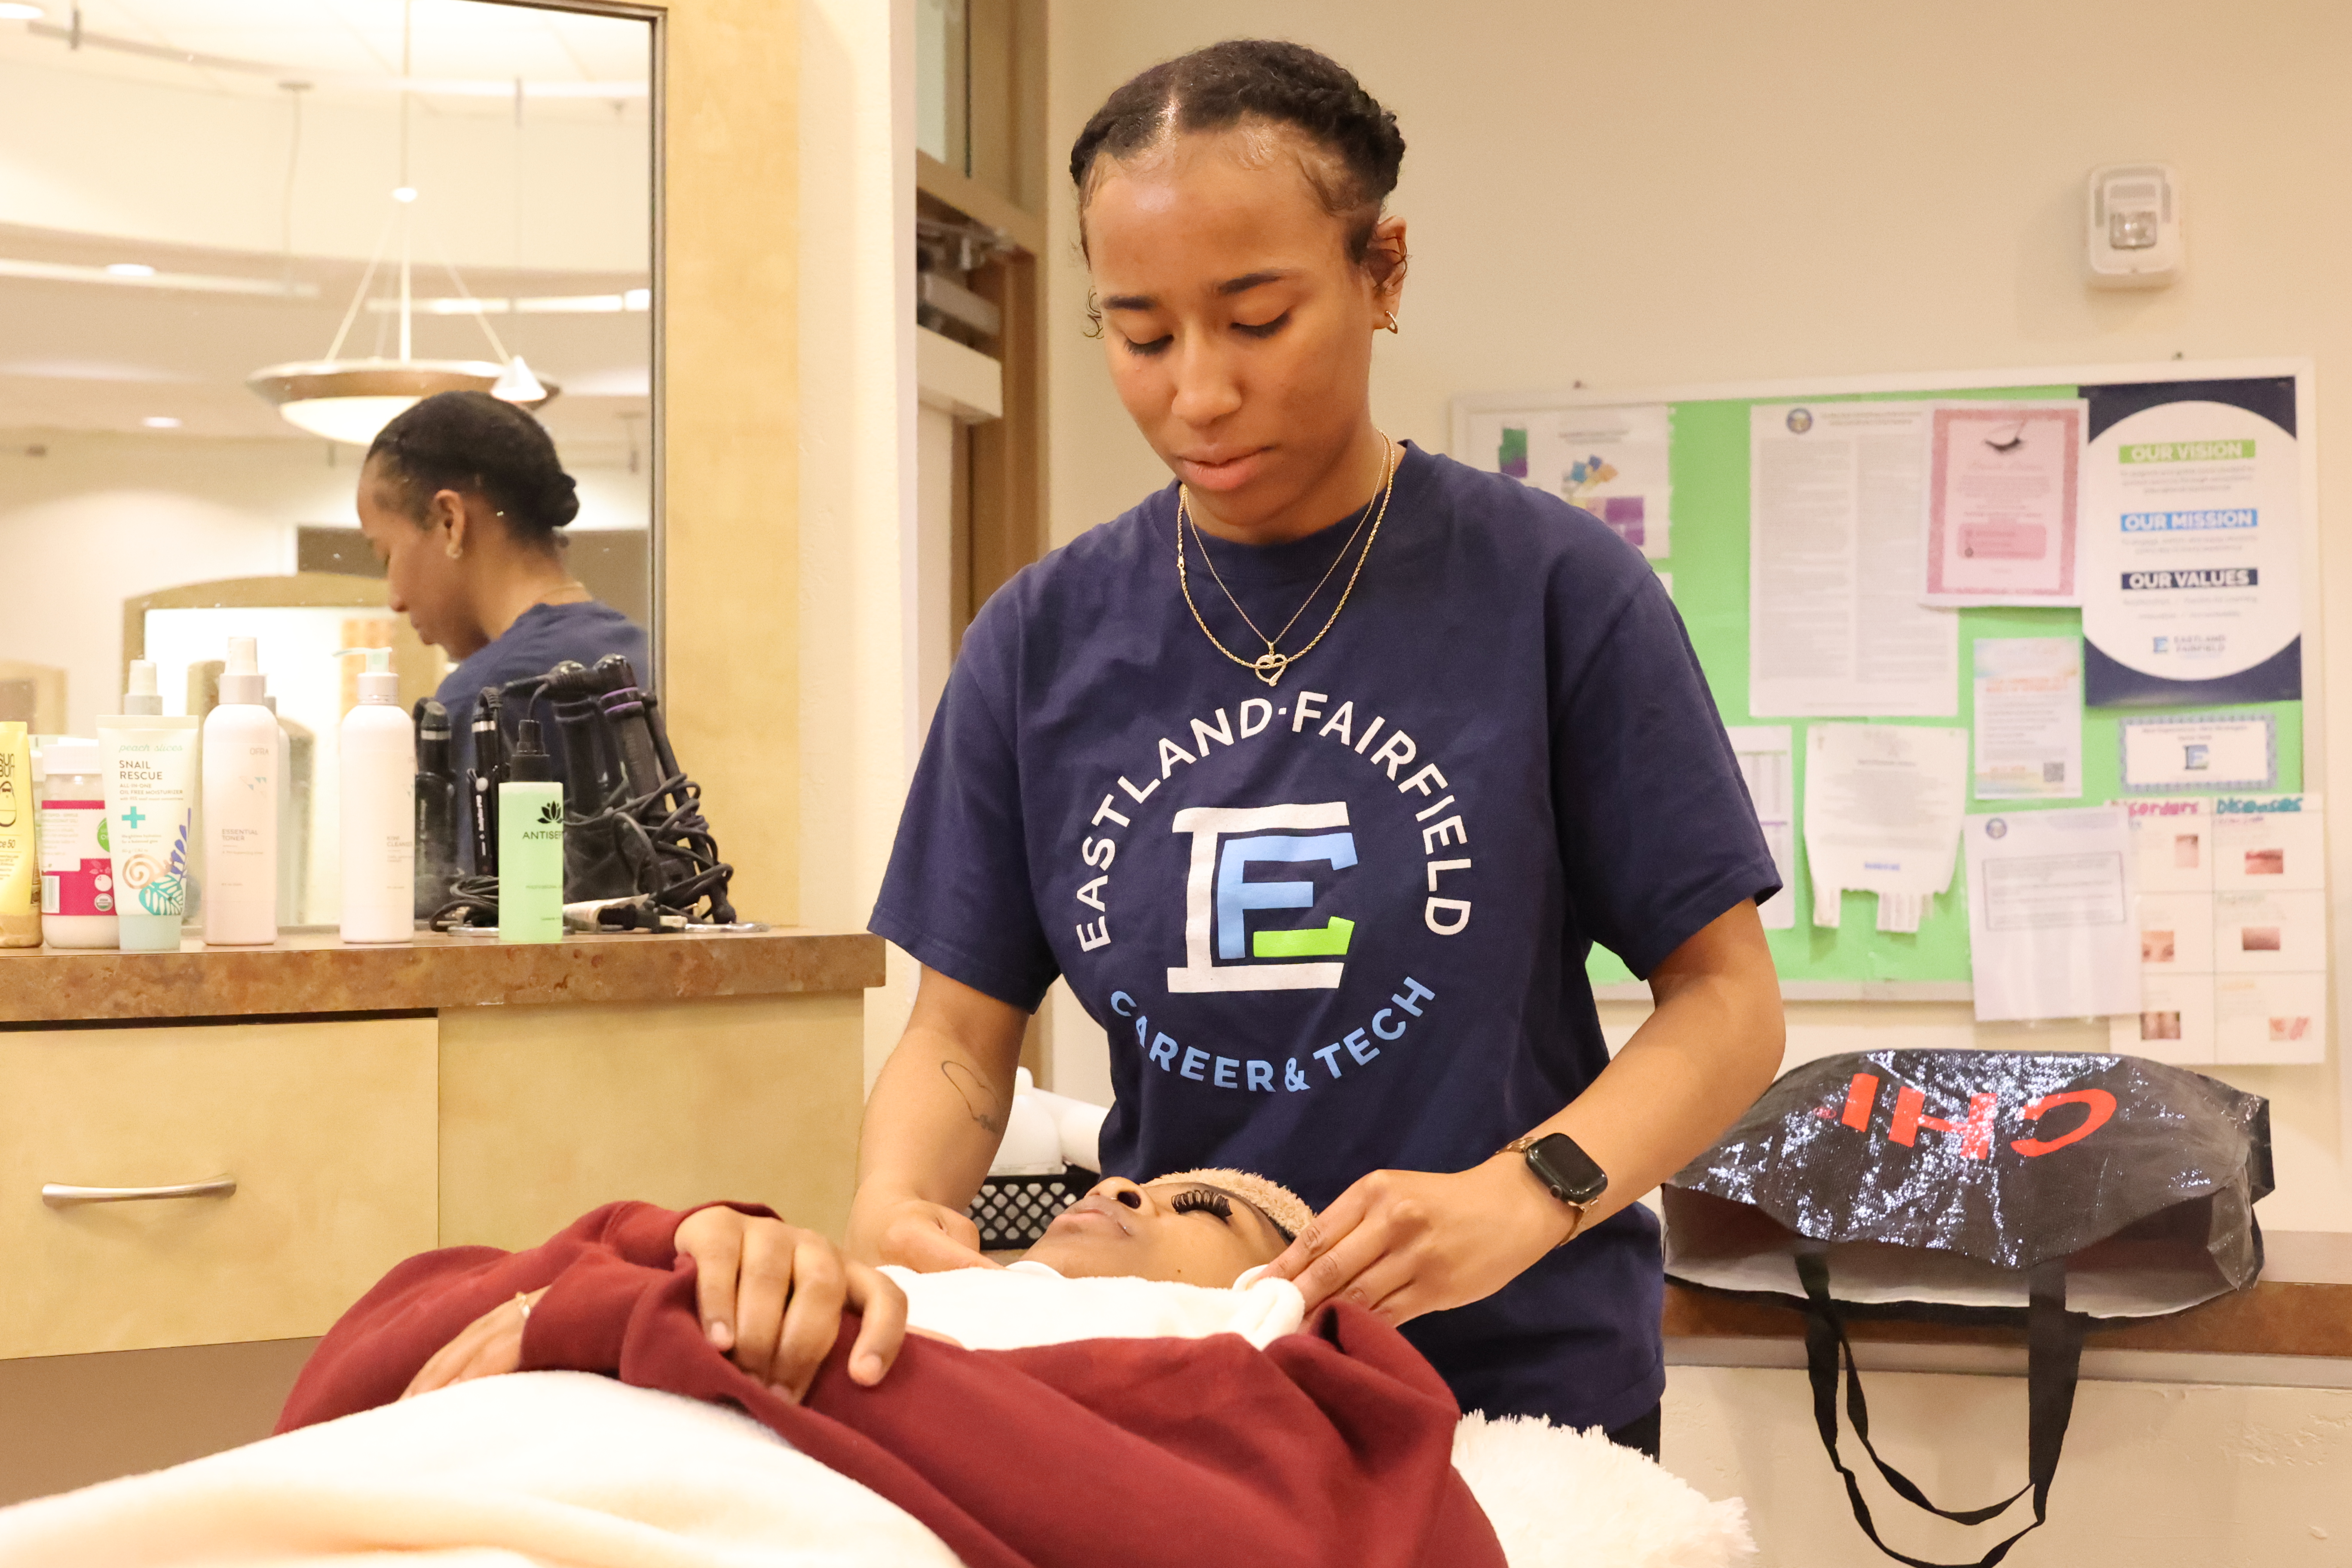 A Black, female student is giving a client a facial.